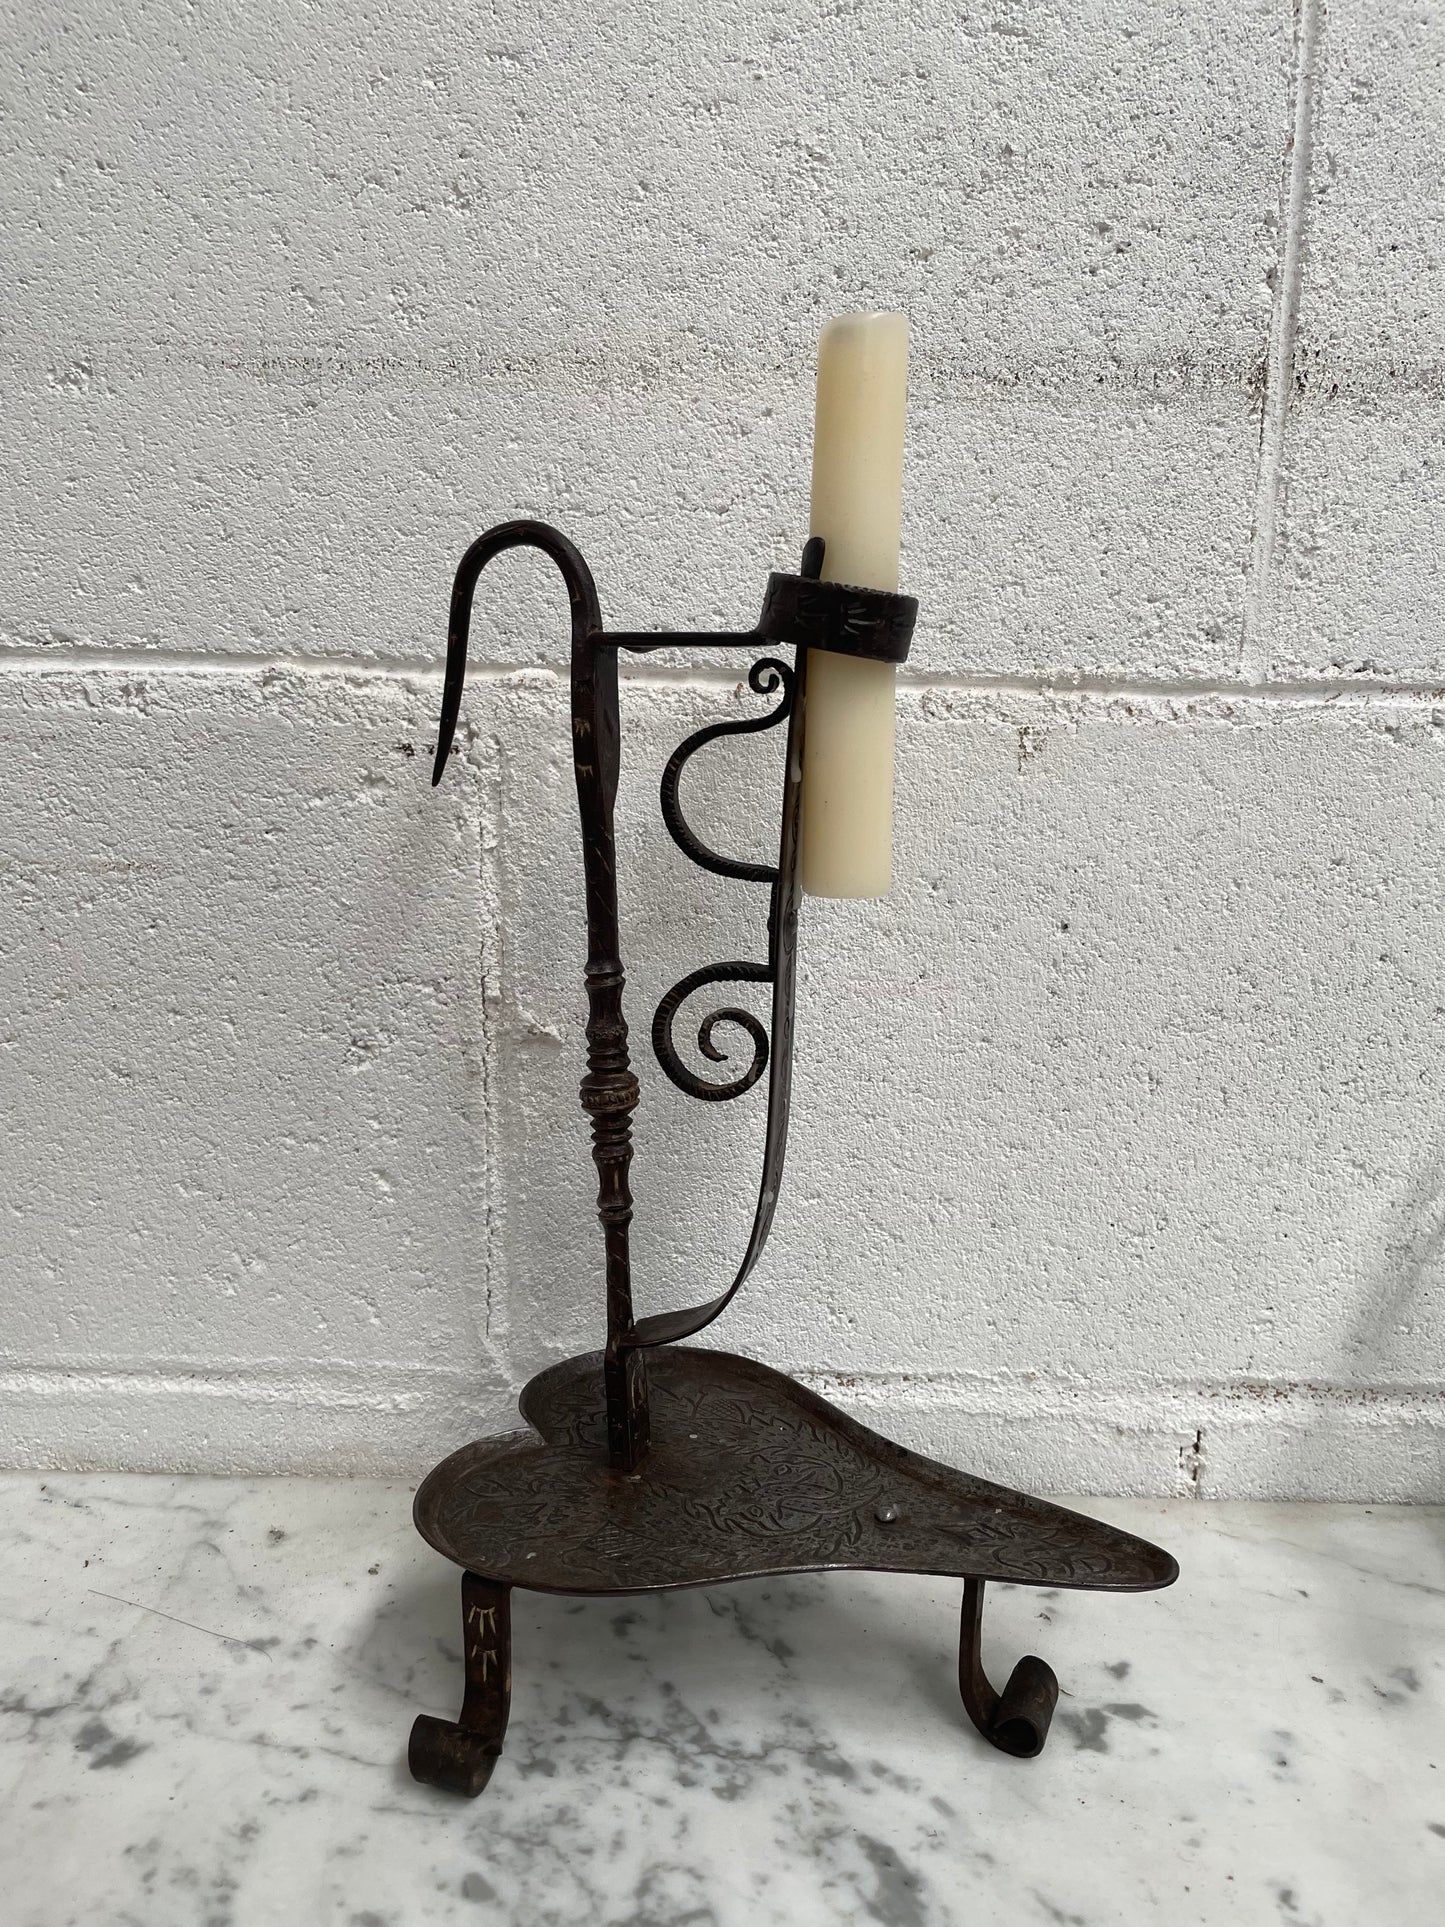 19th Century Wrought Iron Candle Holder by Valerian Gillar Wien